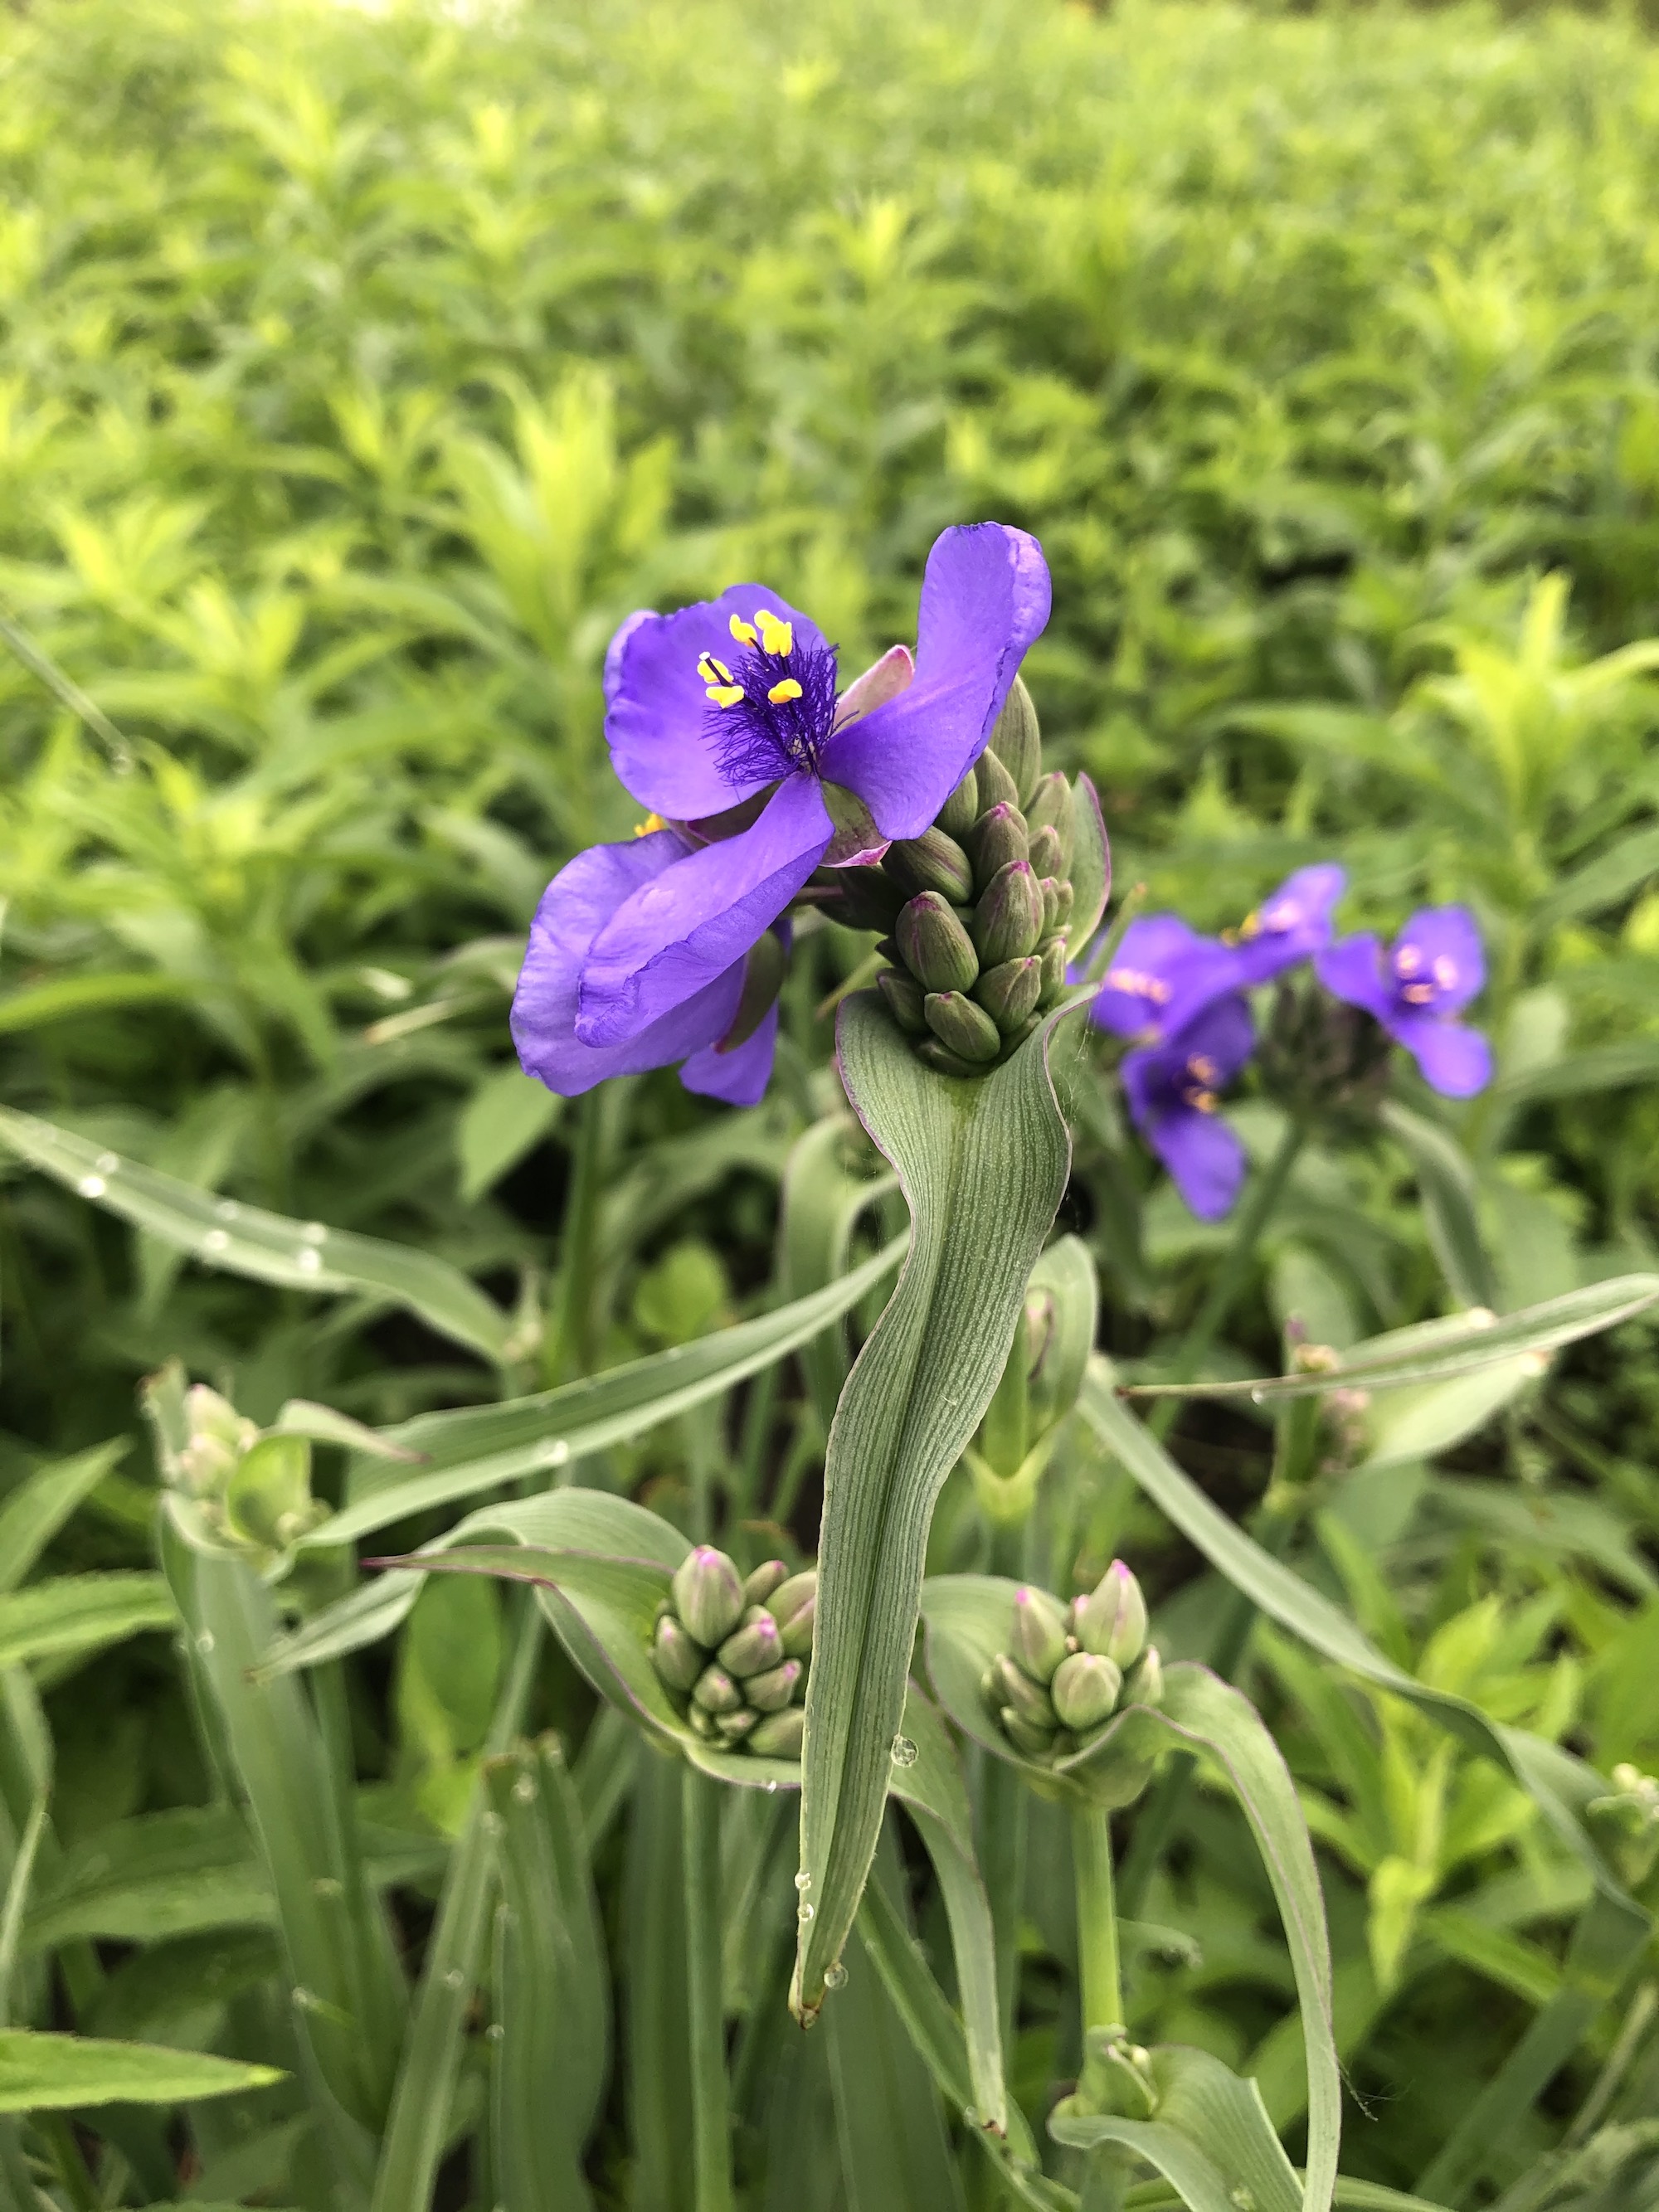 Spiderwort on bank of retaining pond in Madison, Wisconsin on May 24, 2021.